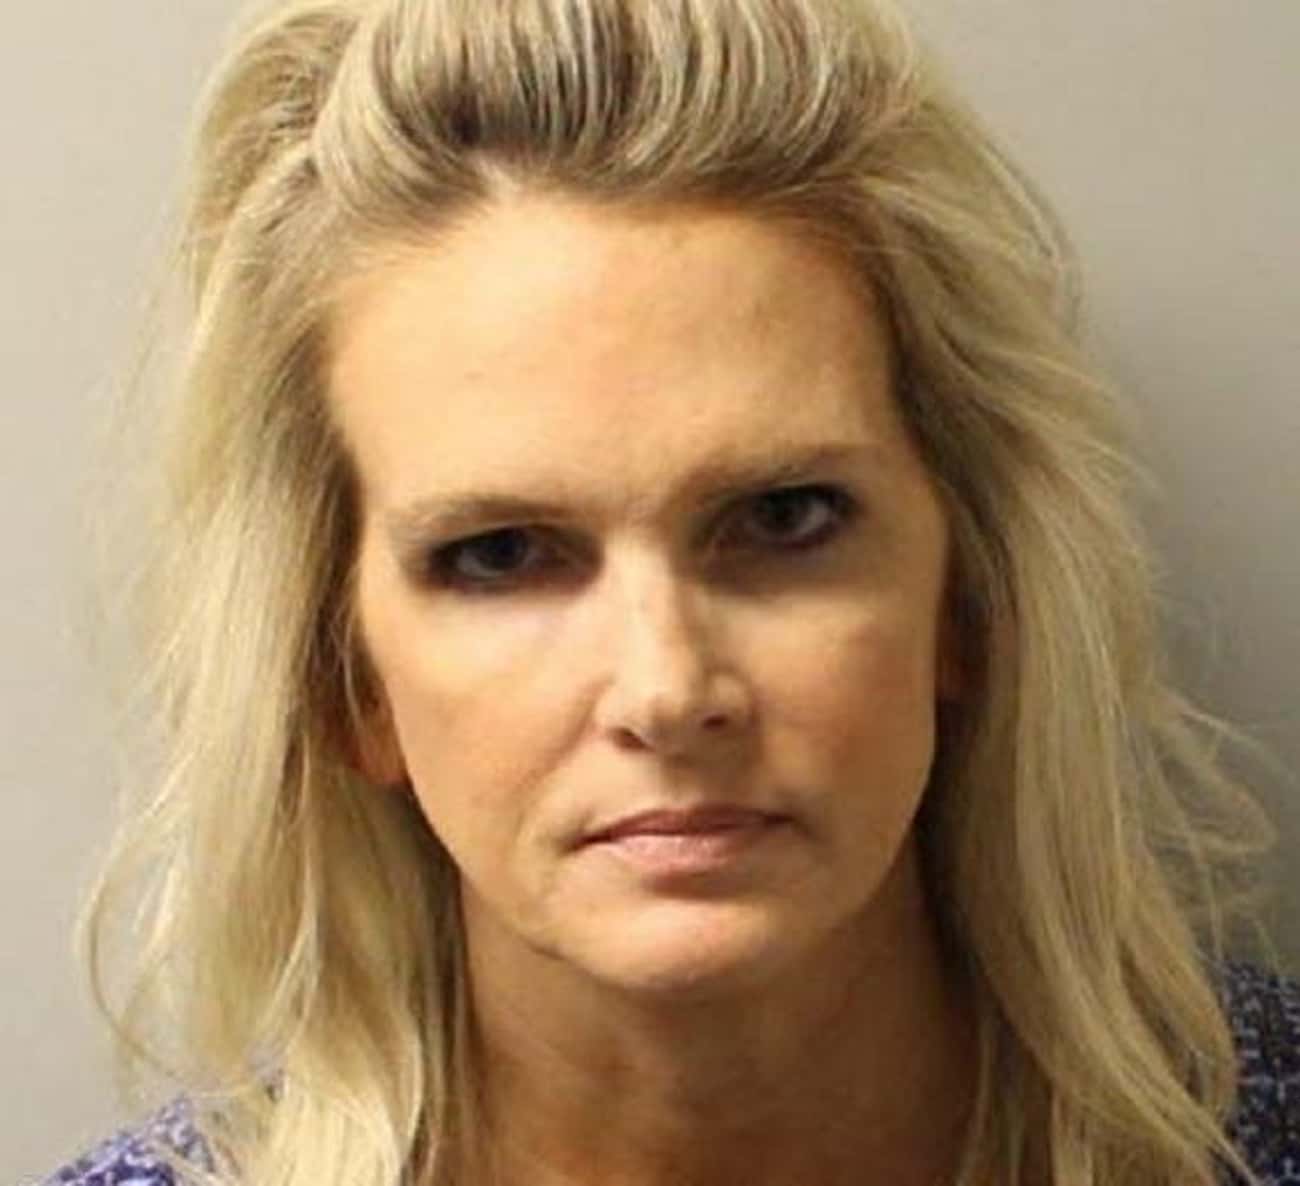 Denise Williams Was Arrested For The First-Degree Murder Of Her Husband